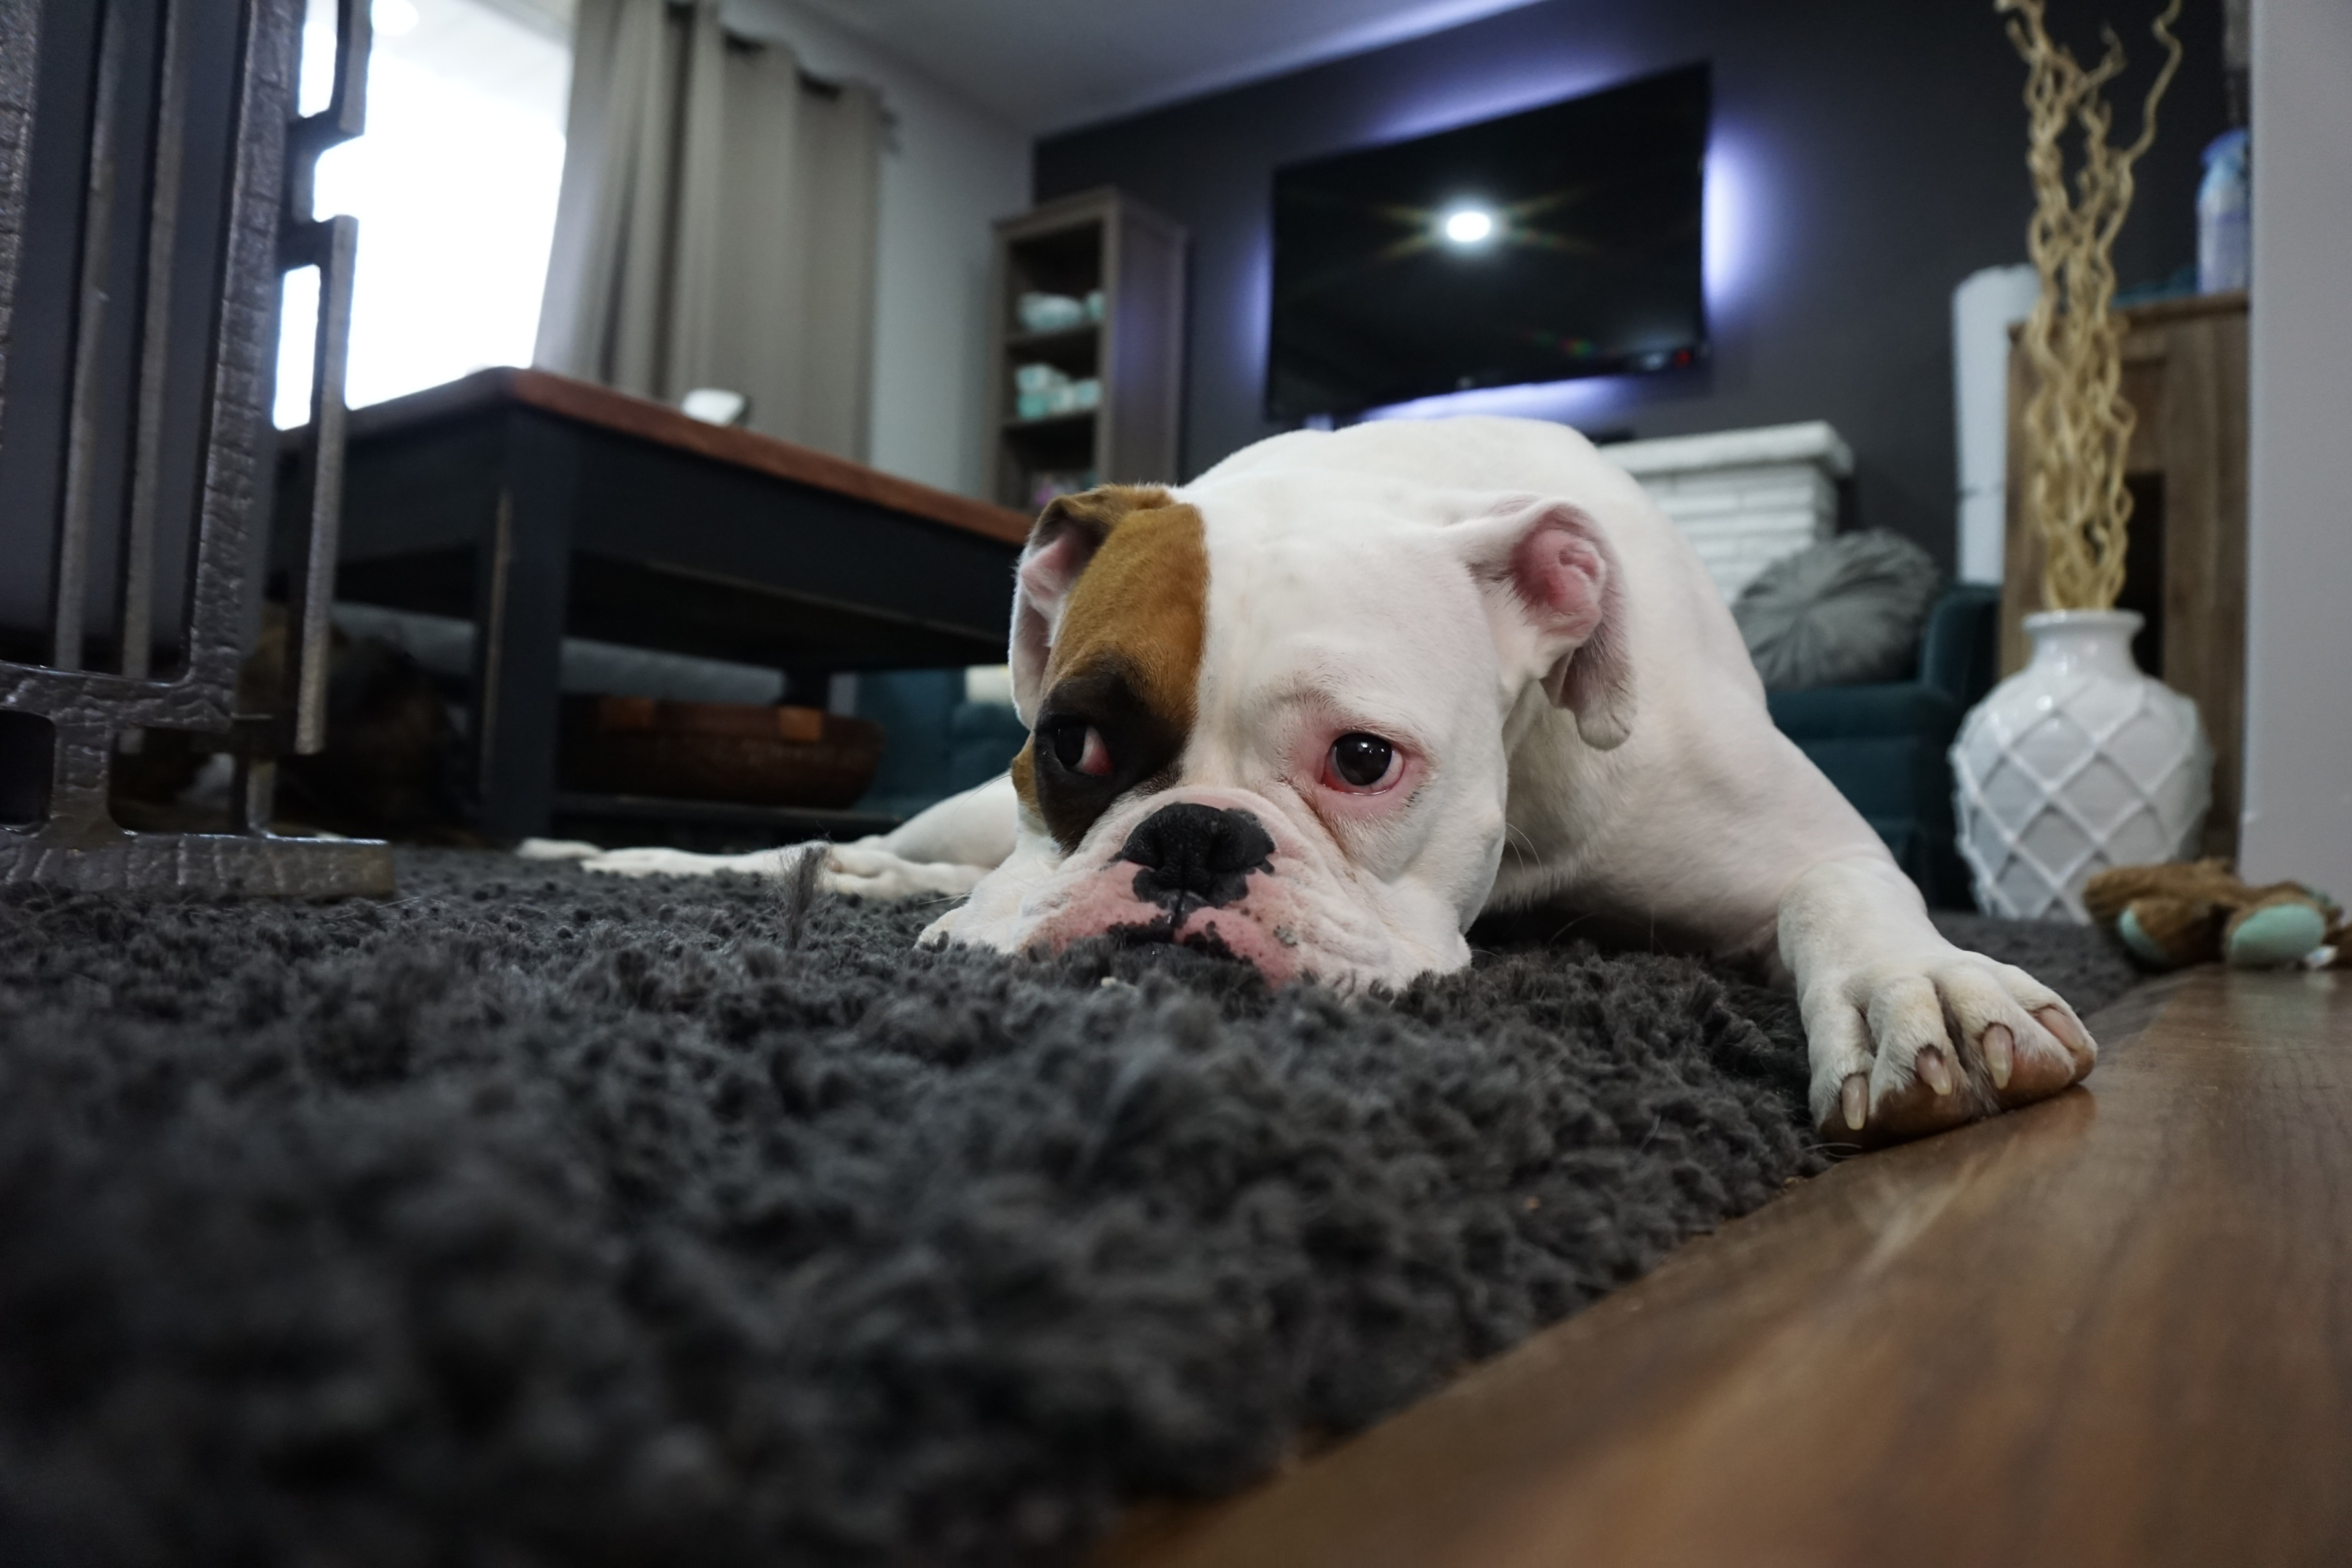 Your pooch could develop separation anxiety if you're not careful.